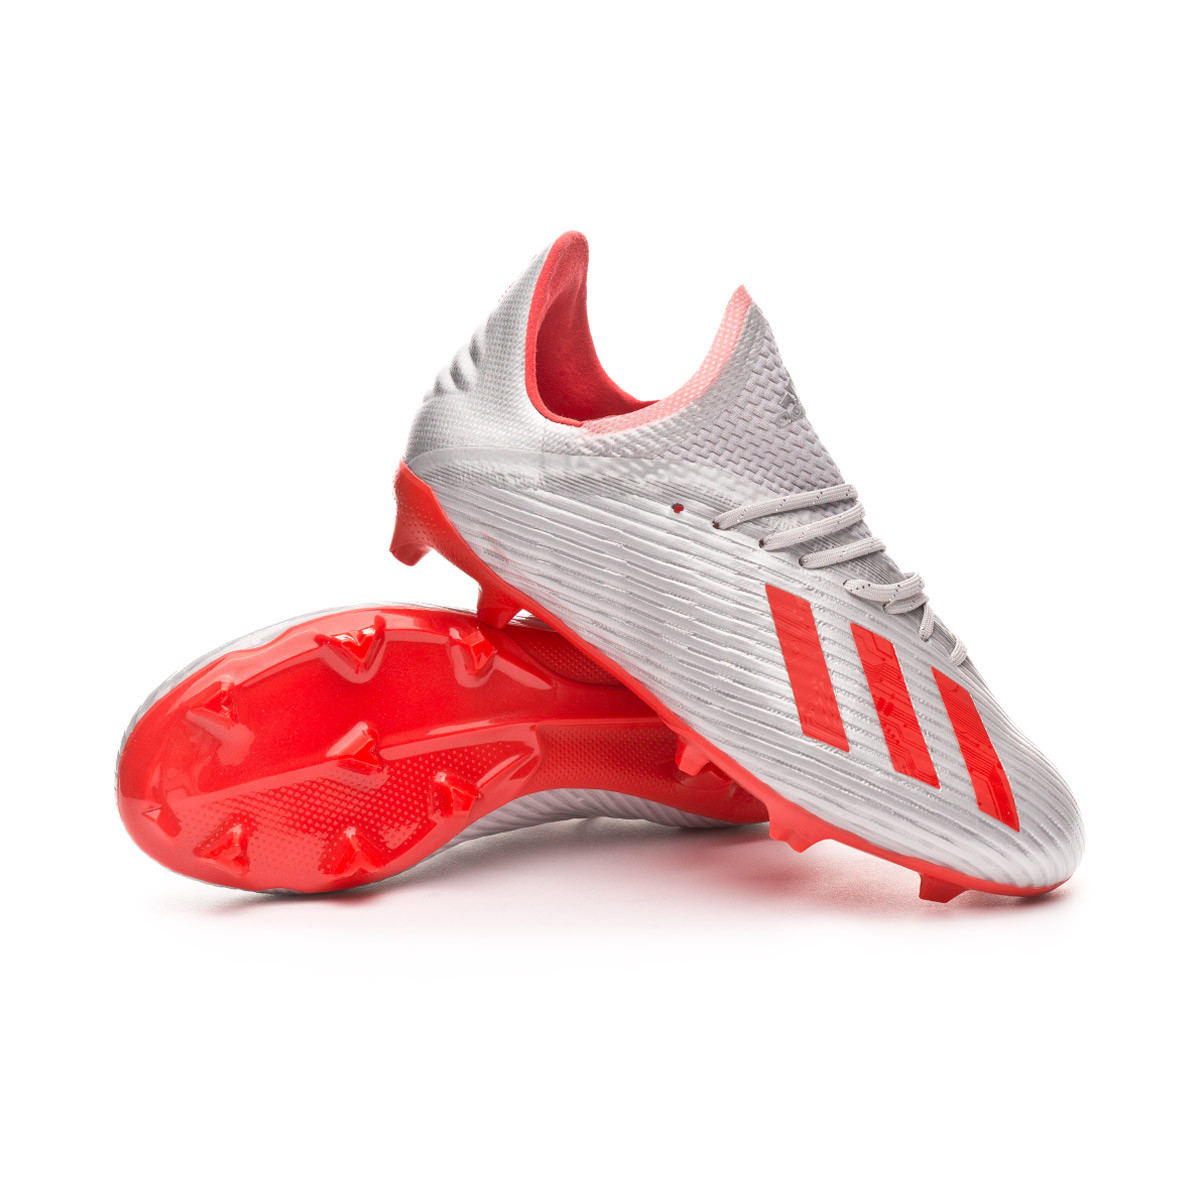 red football boots